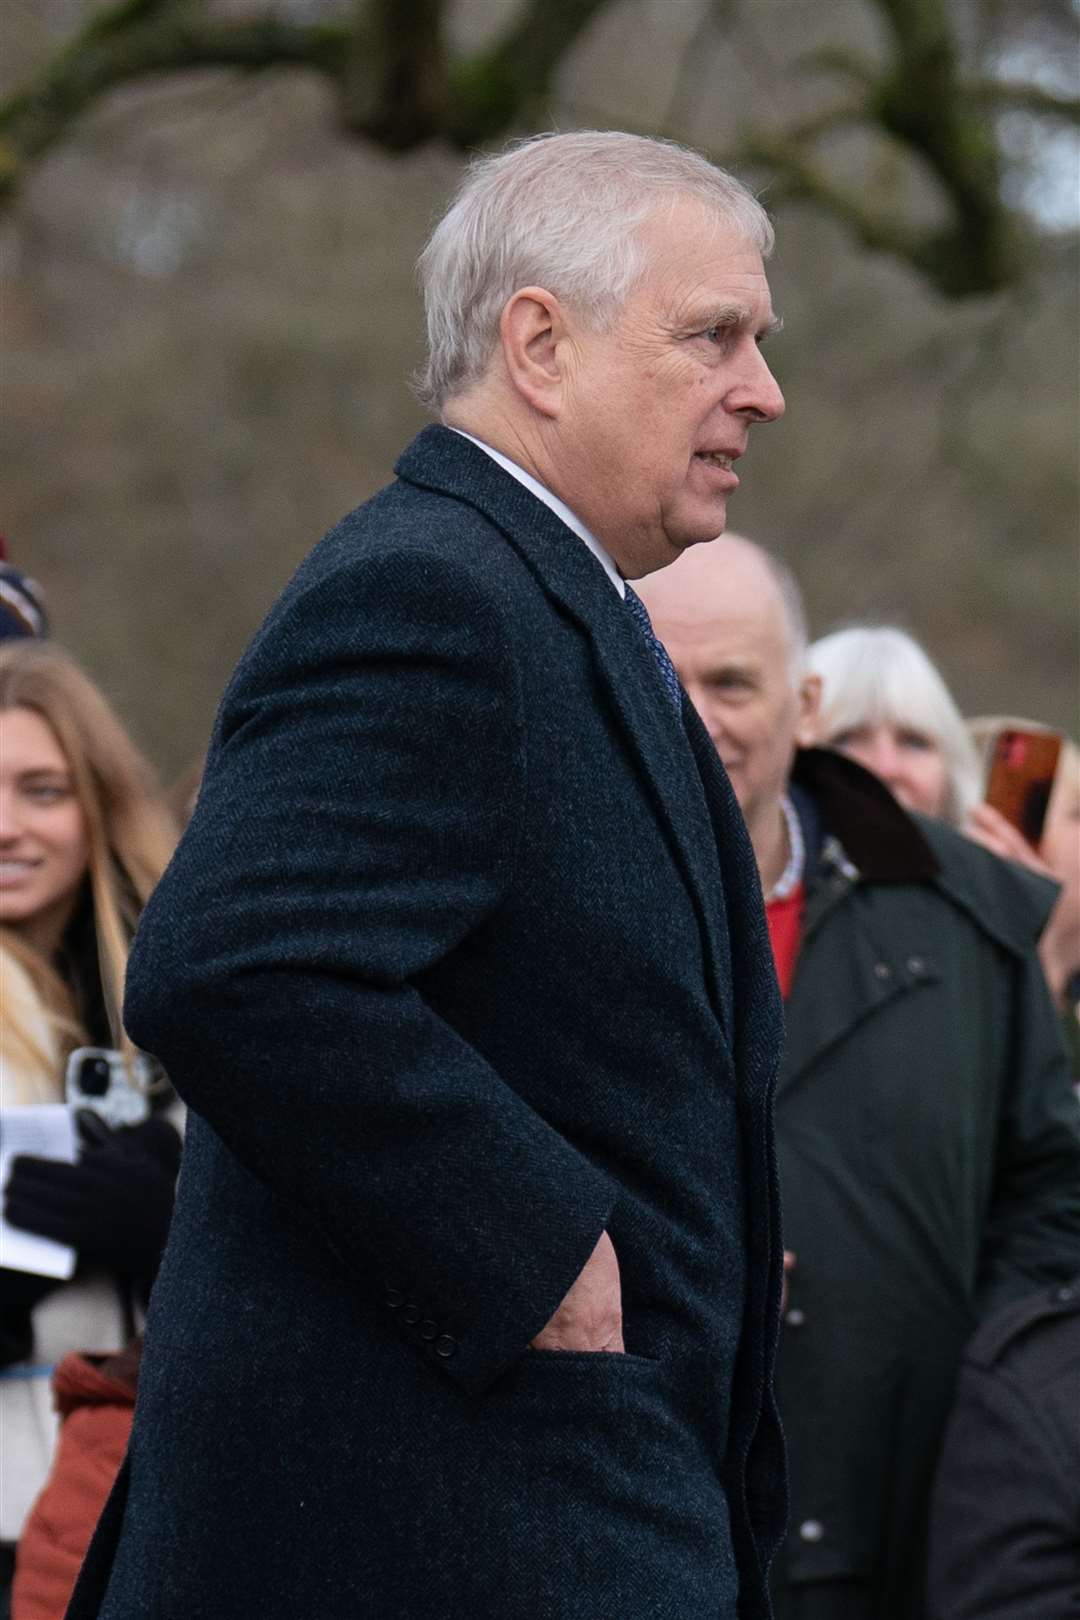 The Duke of York has been named in the court papers (Joe Giddens/PA)